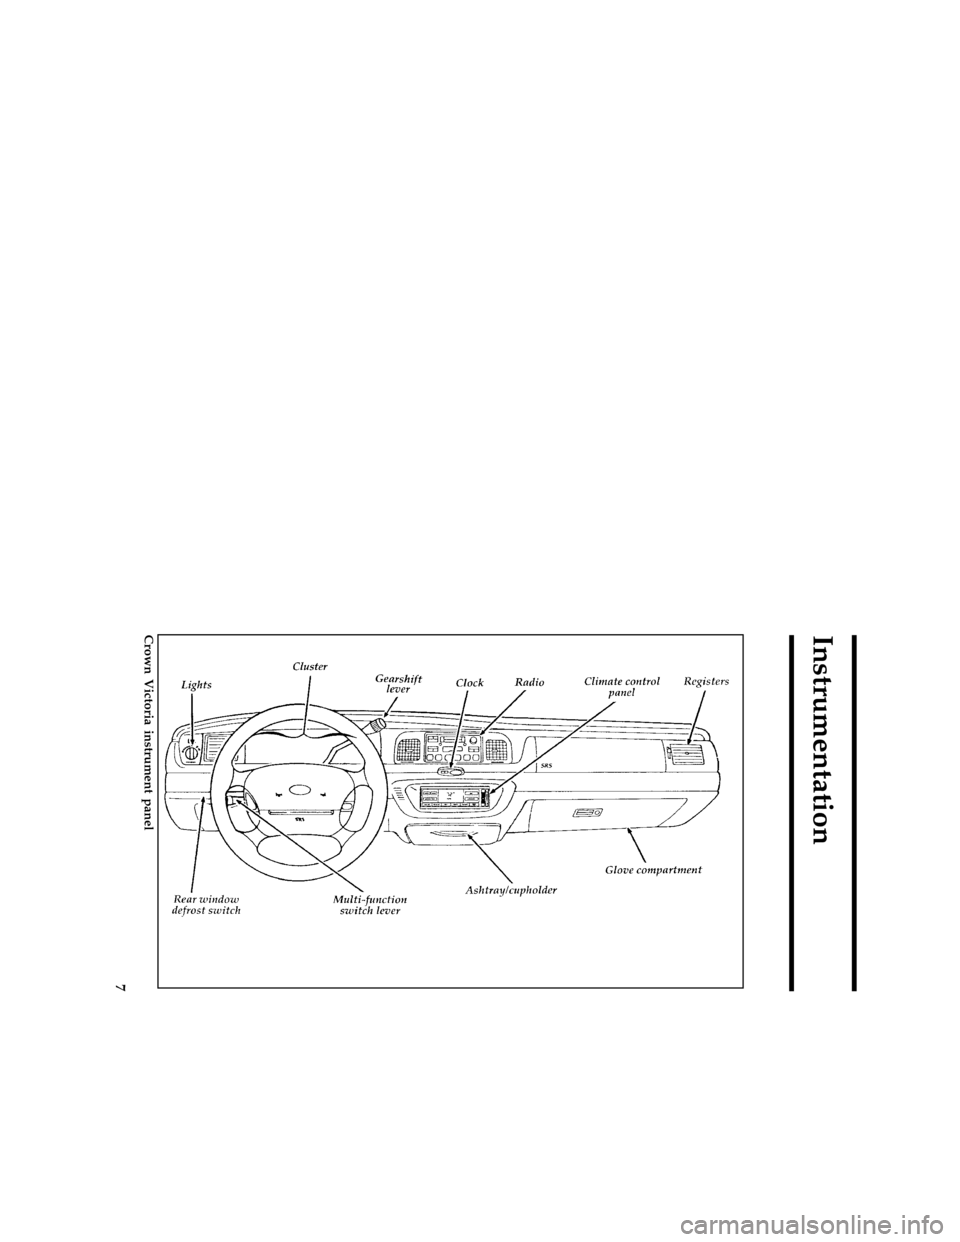 FORD CROWN VICTORIA 1997 1.G Owners Manual 7
Instrumentation
[IS00500( V)12/95]
full page art:0010667-G
Crown Victoria instrument panel
File:03rcisv.ex
Update:Tue Jun 11 15:19:37 1996 